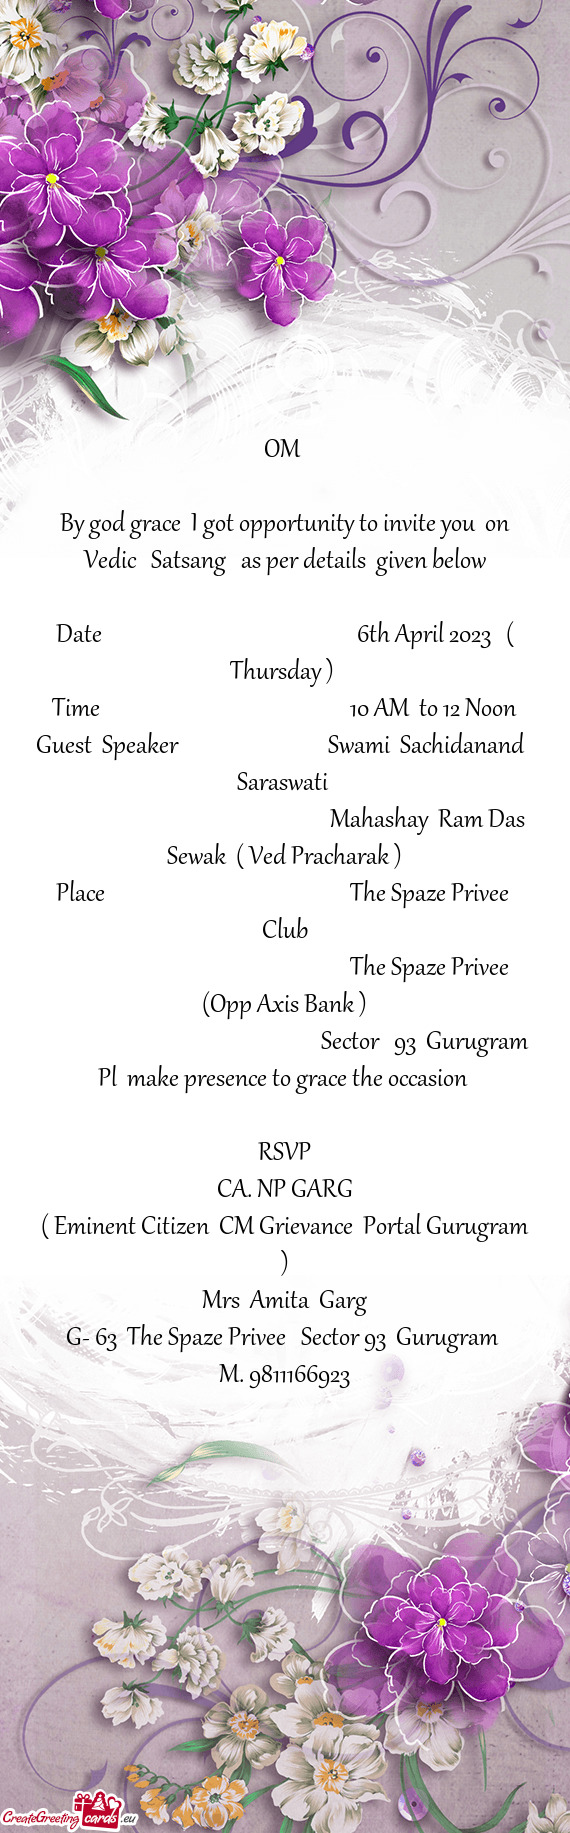 By god grace I got opportunity to invite you on Vedic Satsang as per details given below